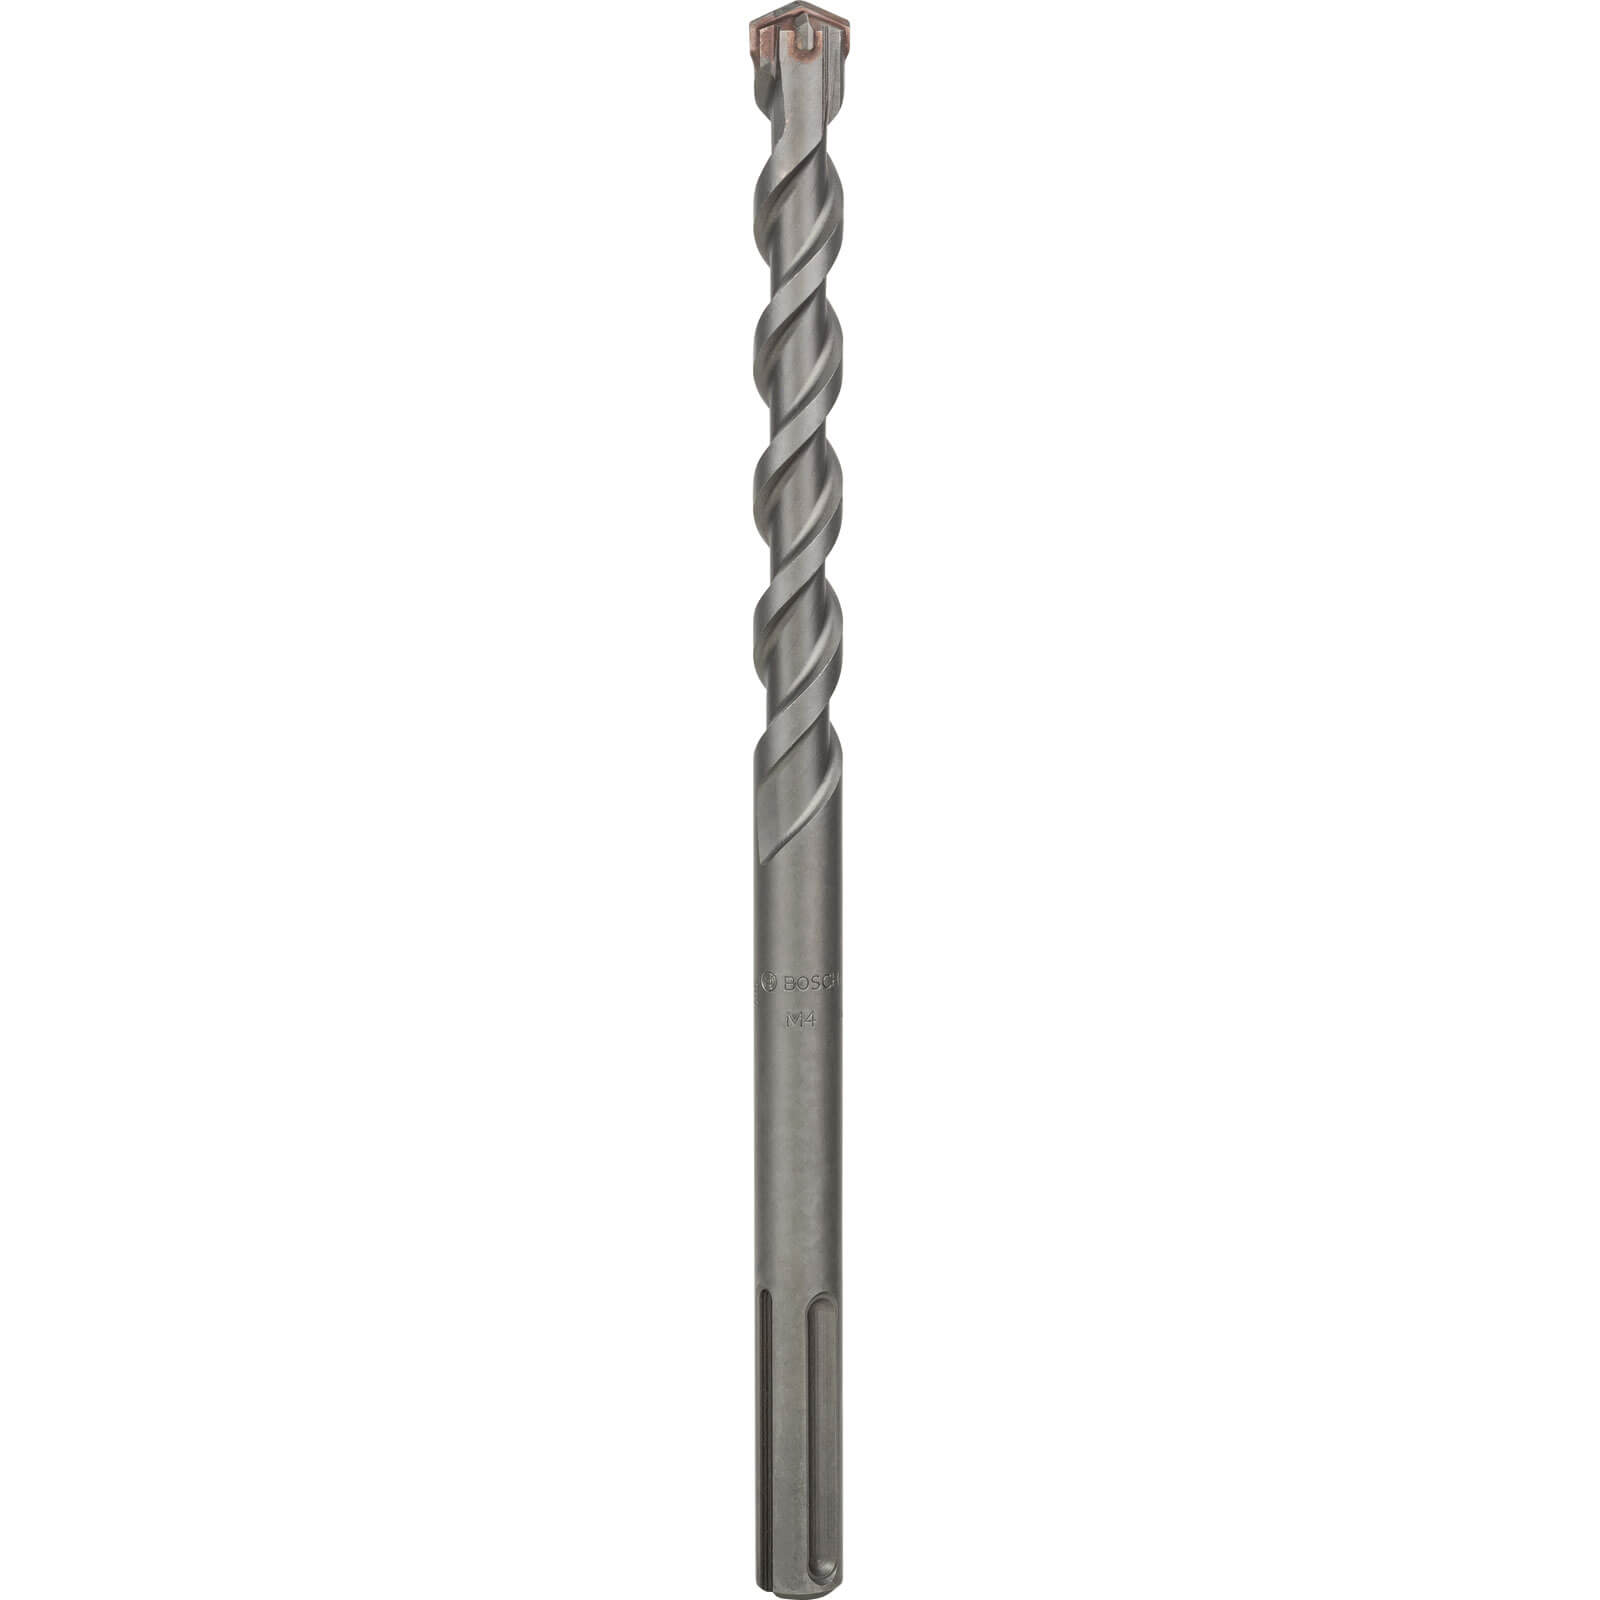 Image of Bosch M4 SDS Max Masonry Drill Bit 20mm 320mm Pack of 1